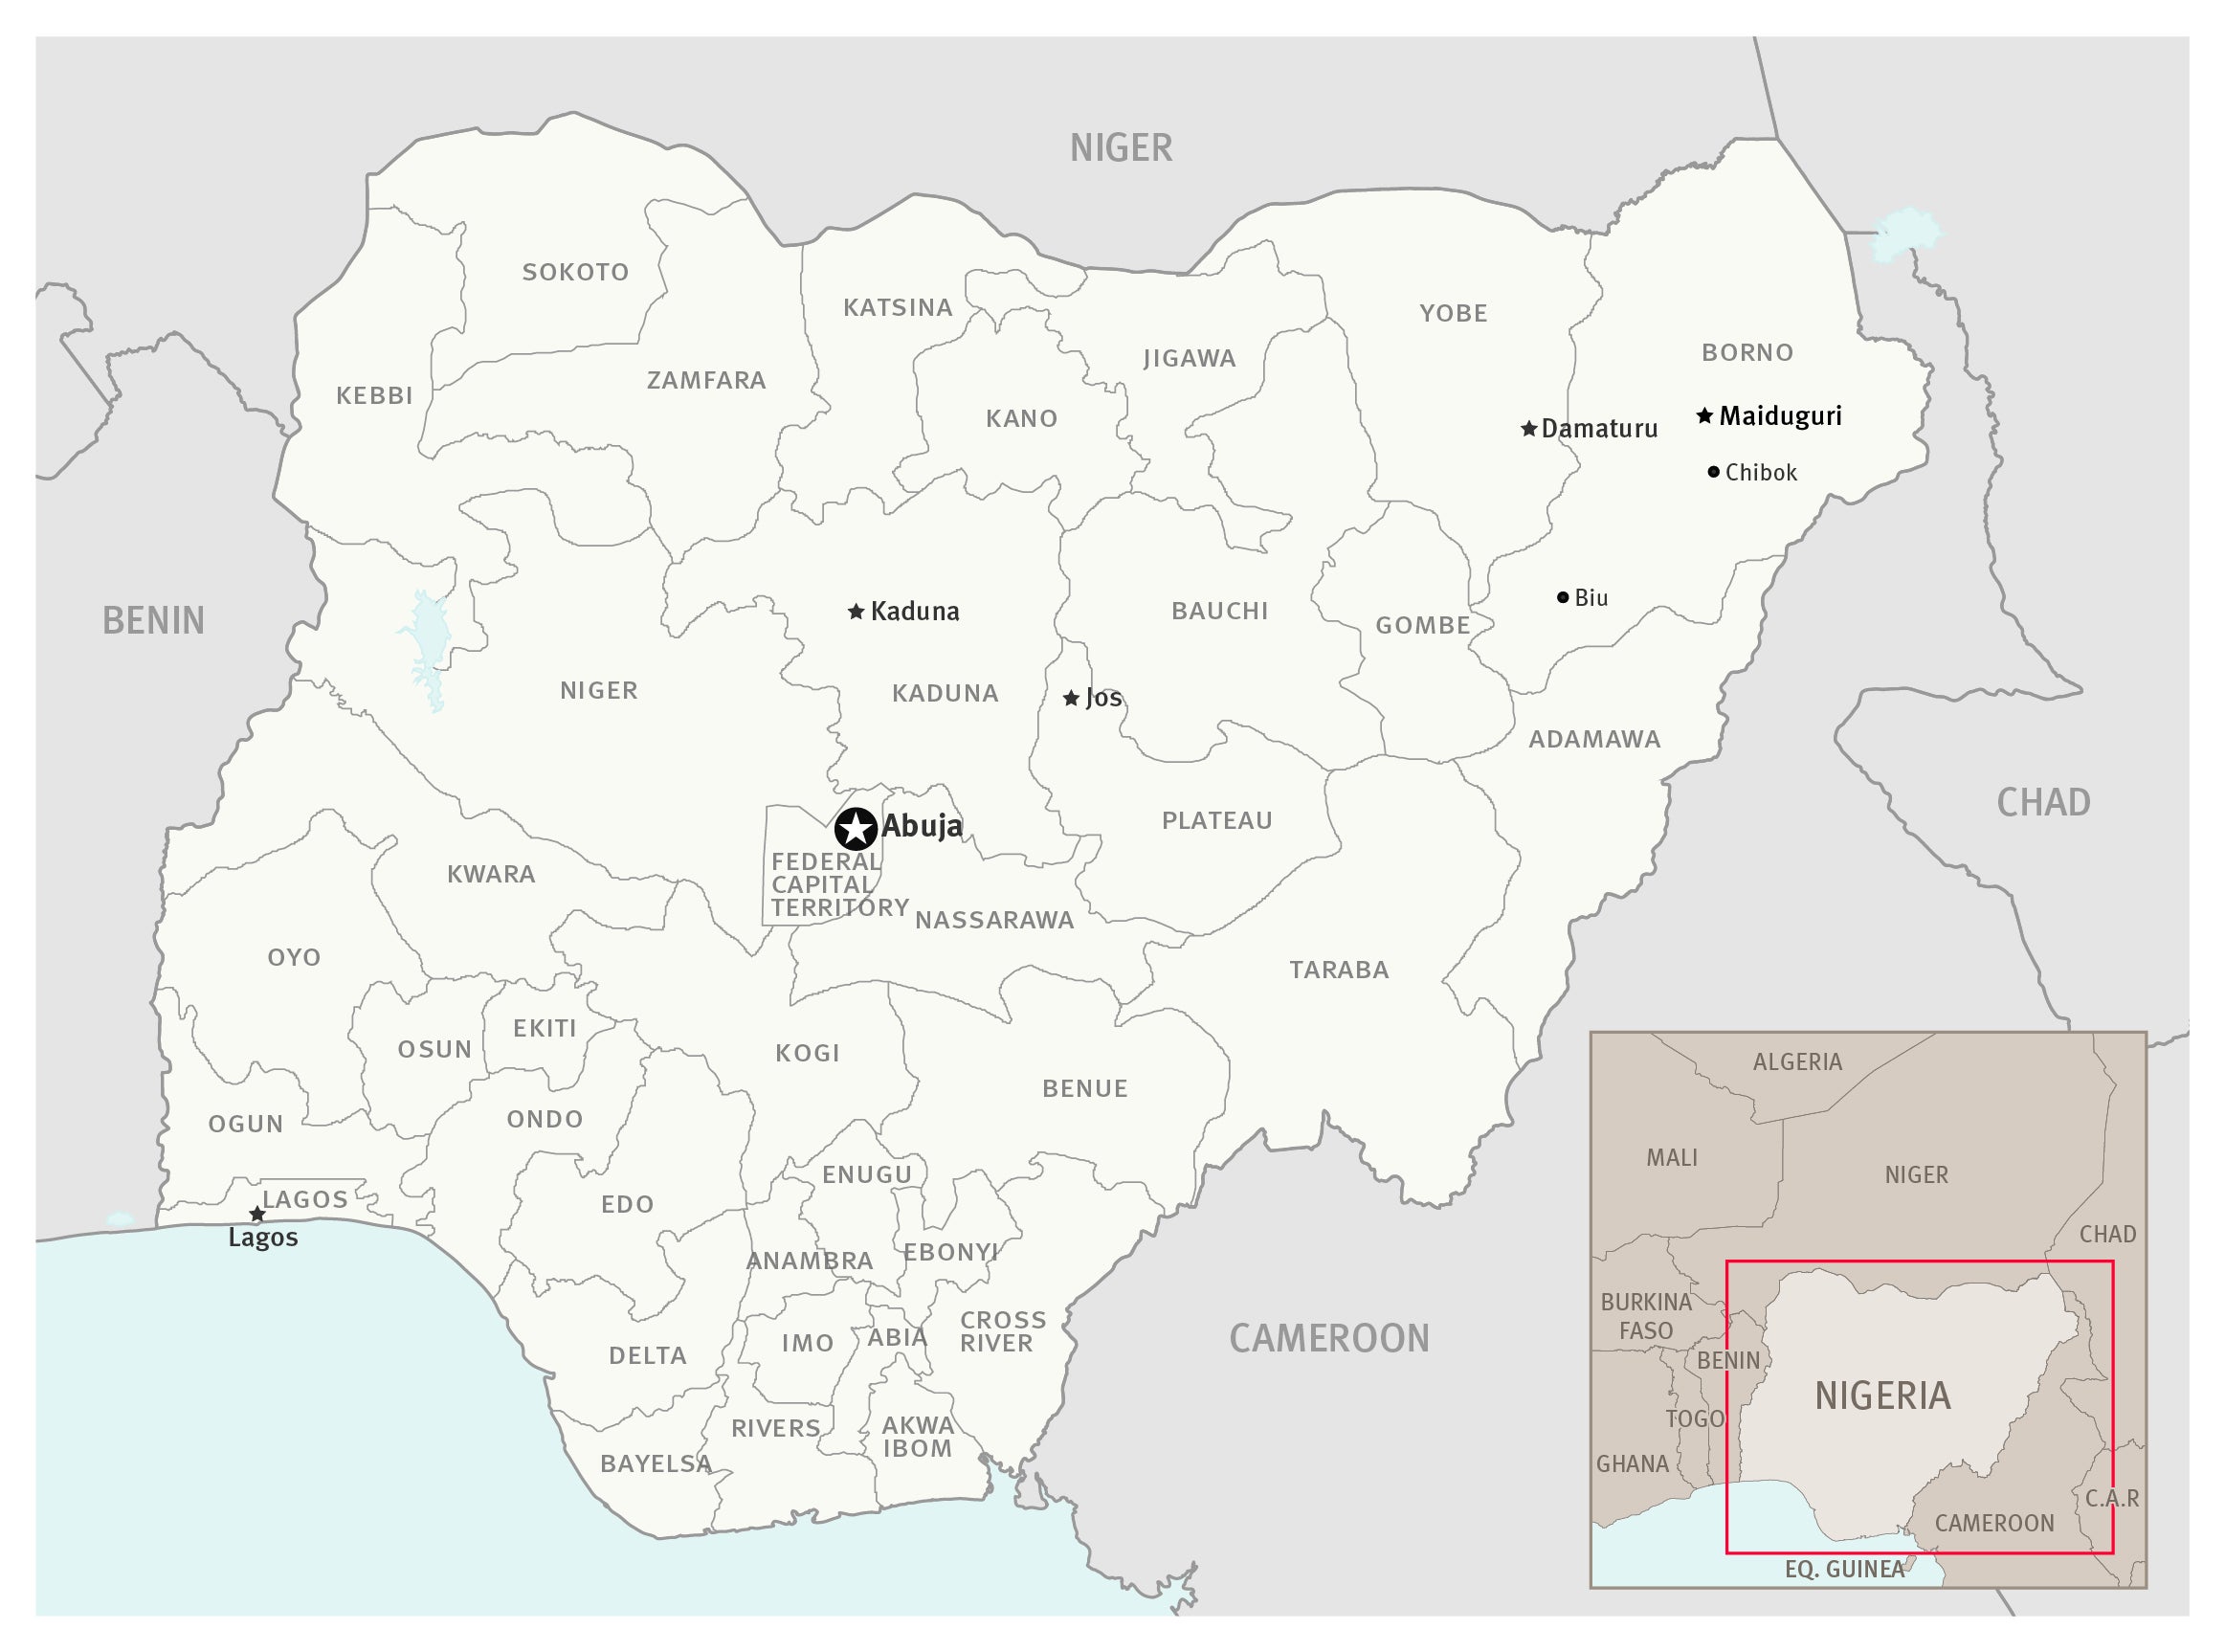 Overview map of the provinces of Nigeria